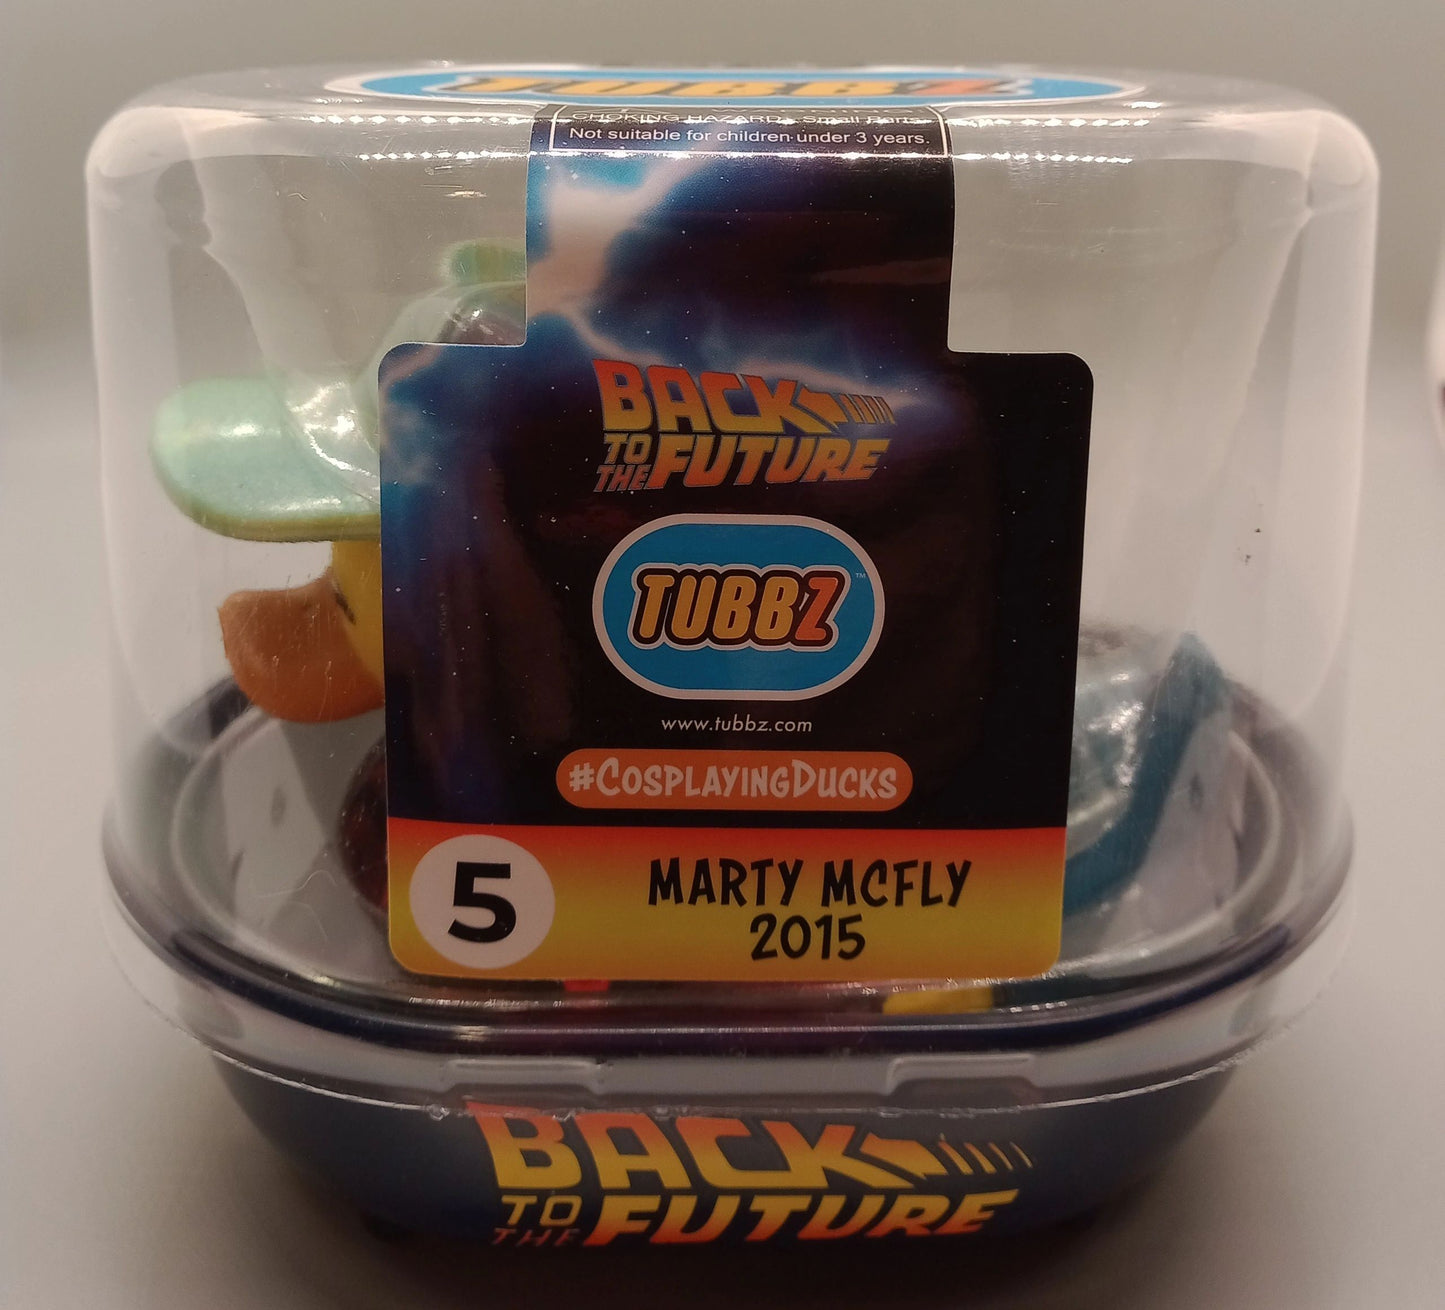 Tubbz - Back to the Future - Marty McFly - 2015